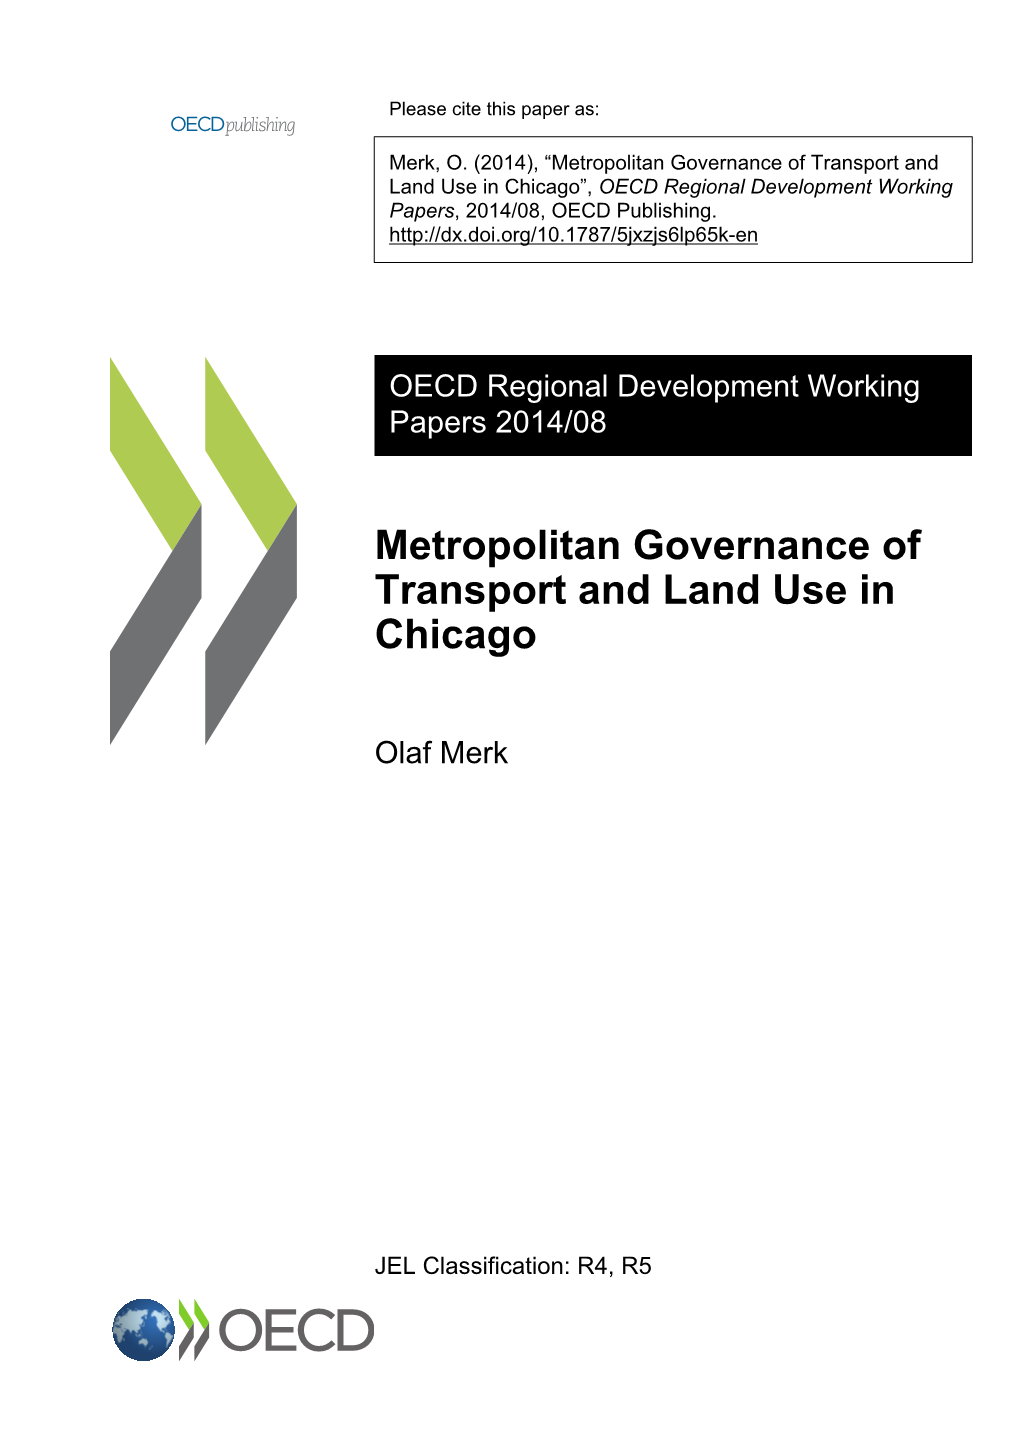 Metropolitan Governance of Transport and Land Use in Chicago”, OECD Regional Development Working Papers, 2014/08, OECD Publishing